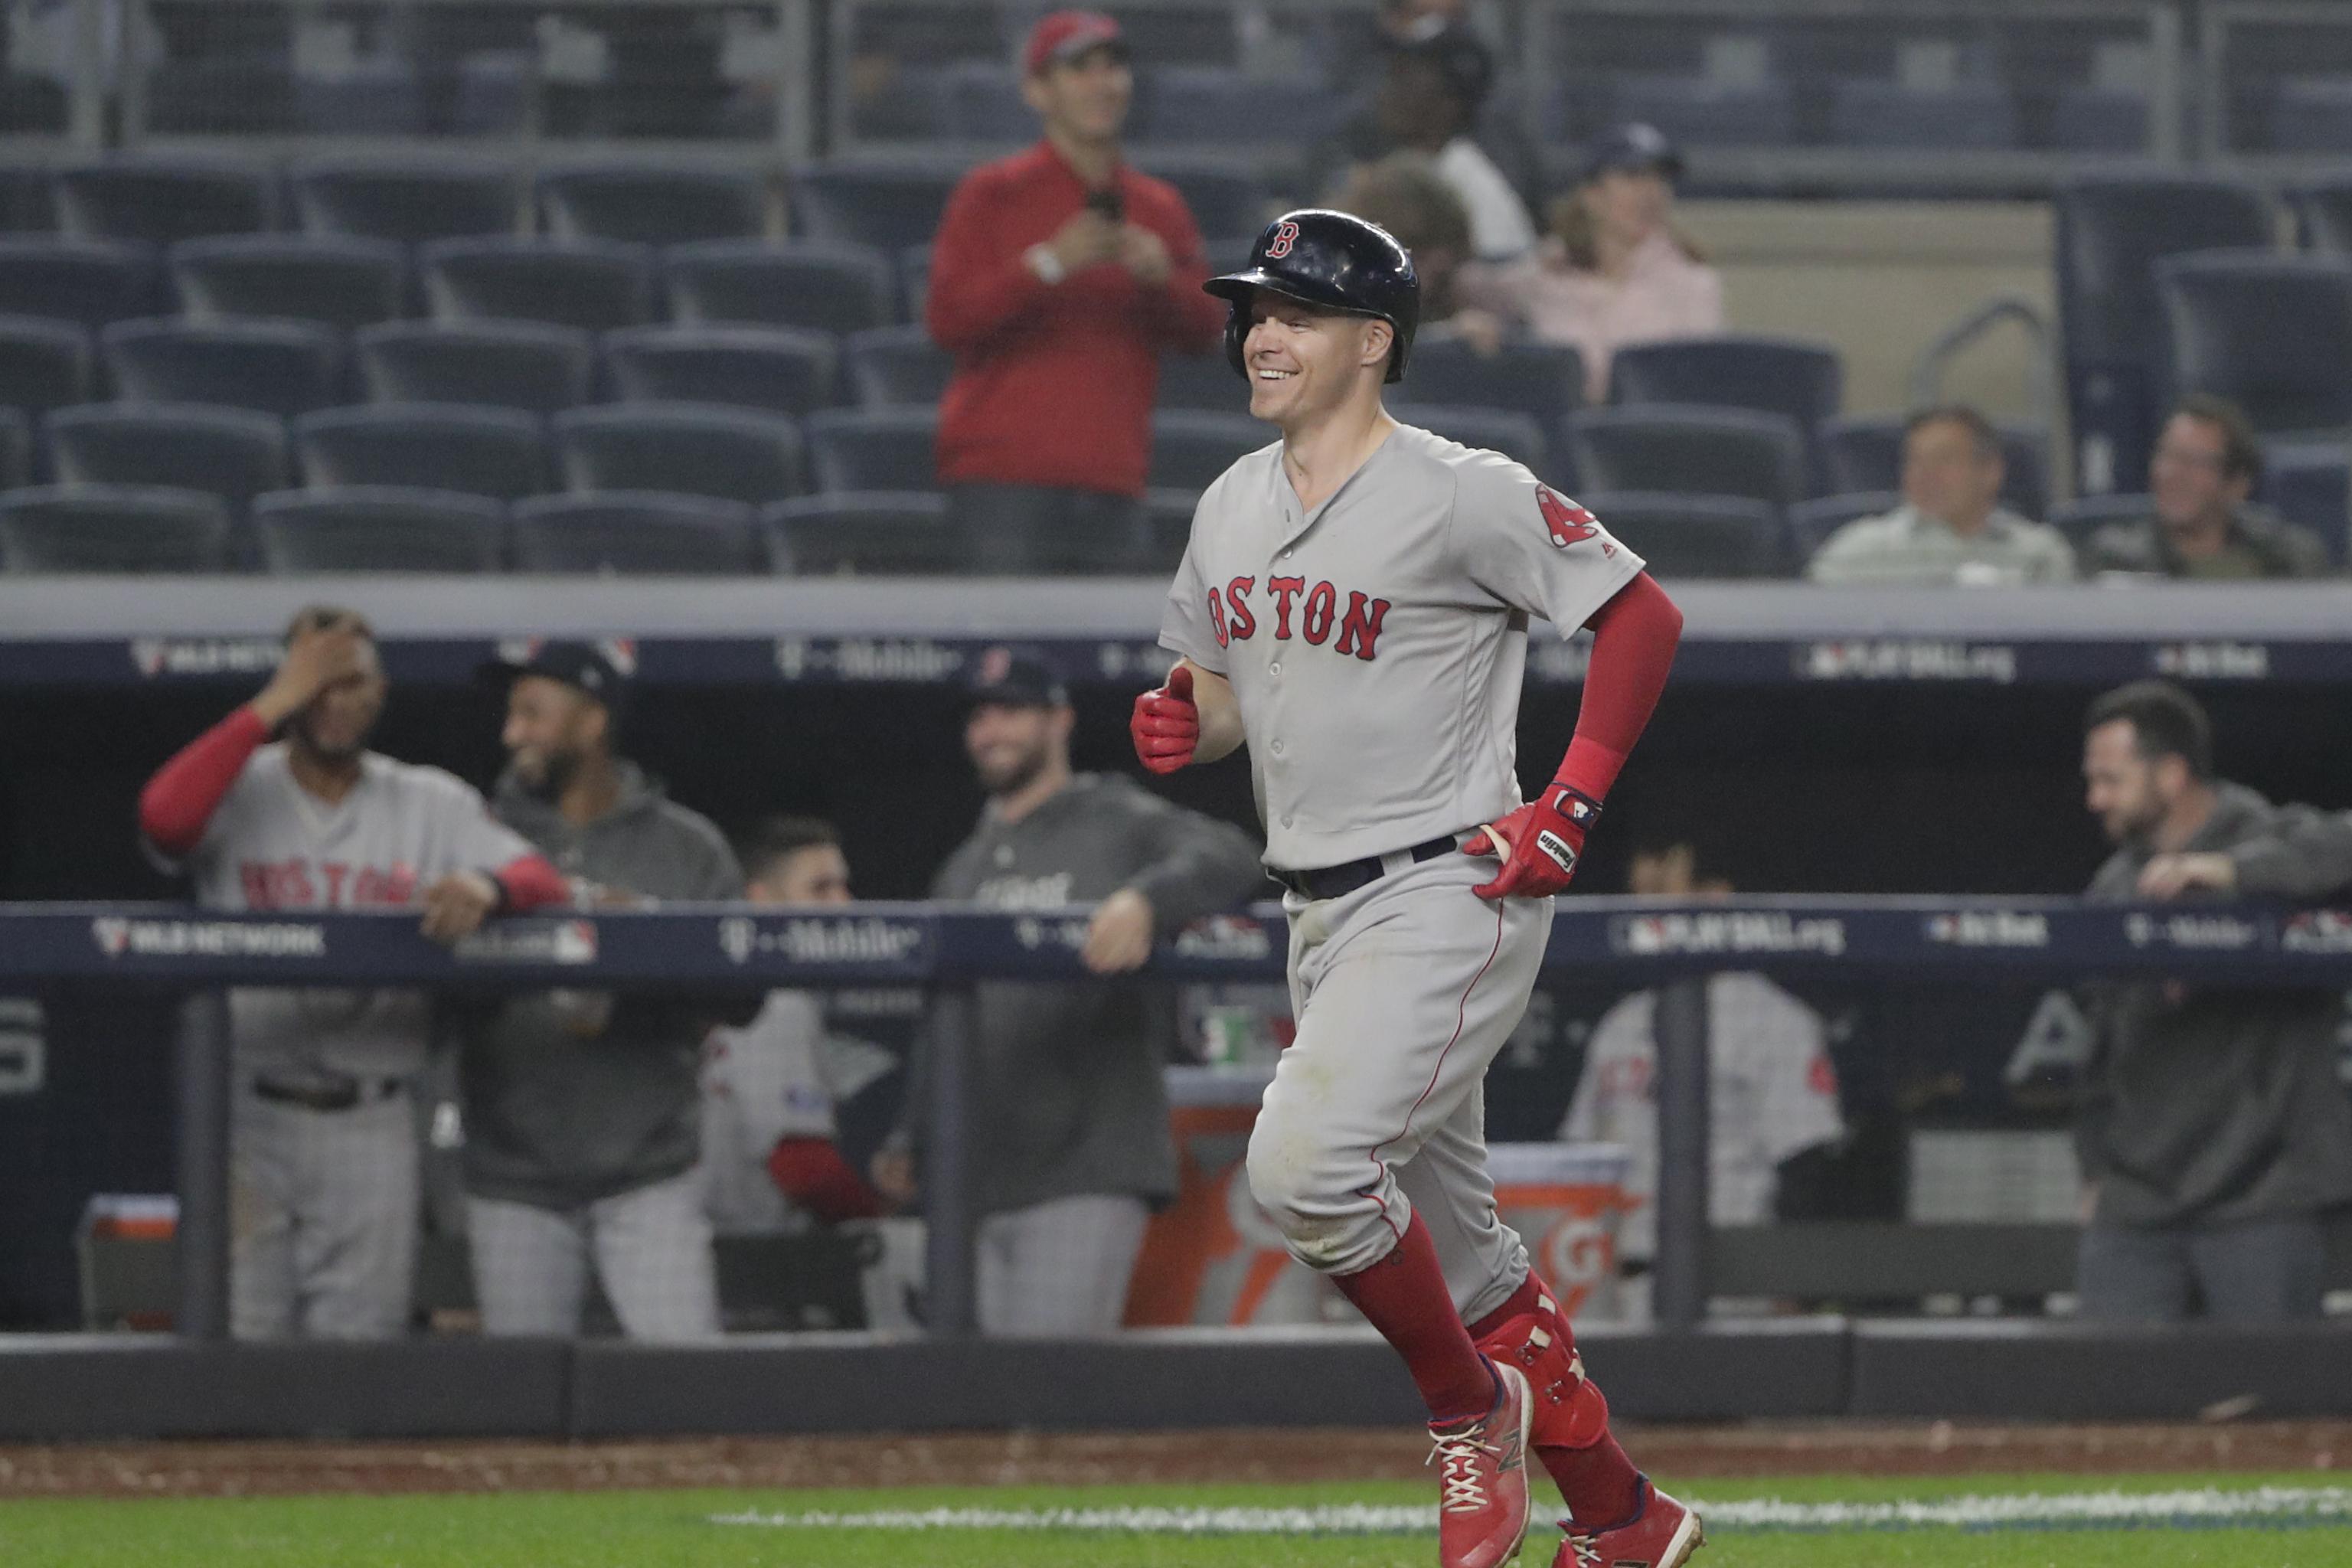 Photo: Snapshot: Brock Holt hits for cycle